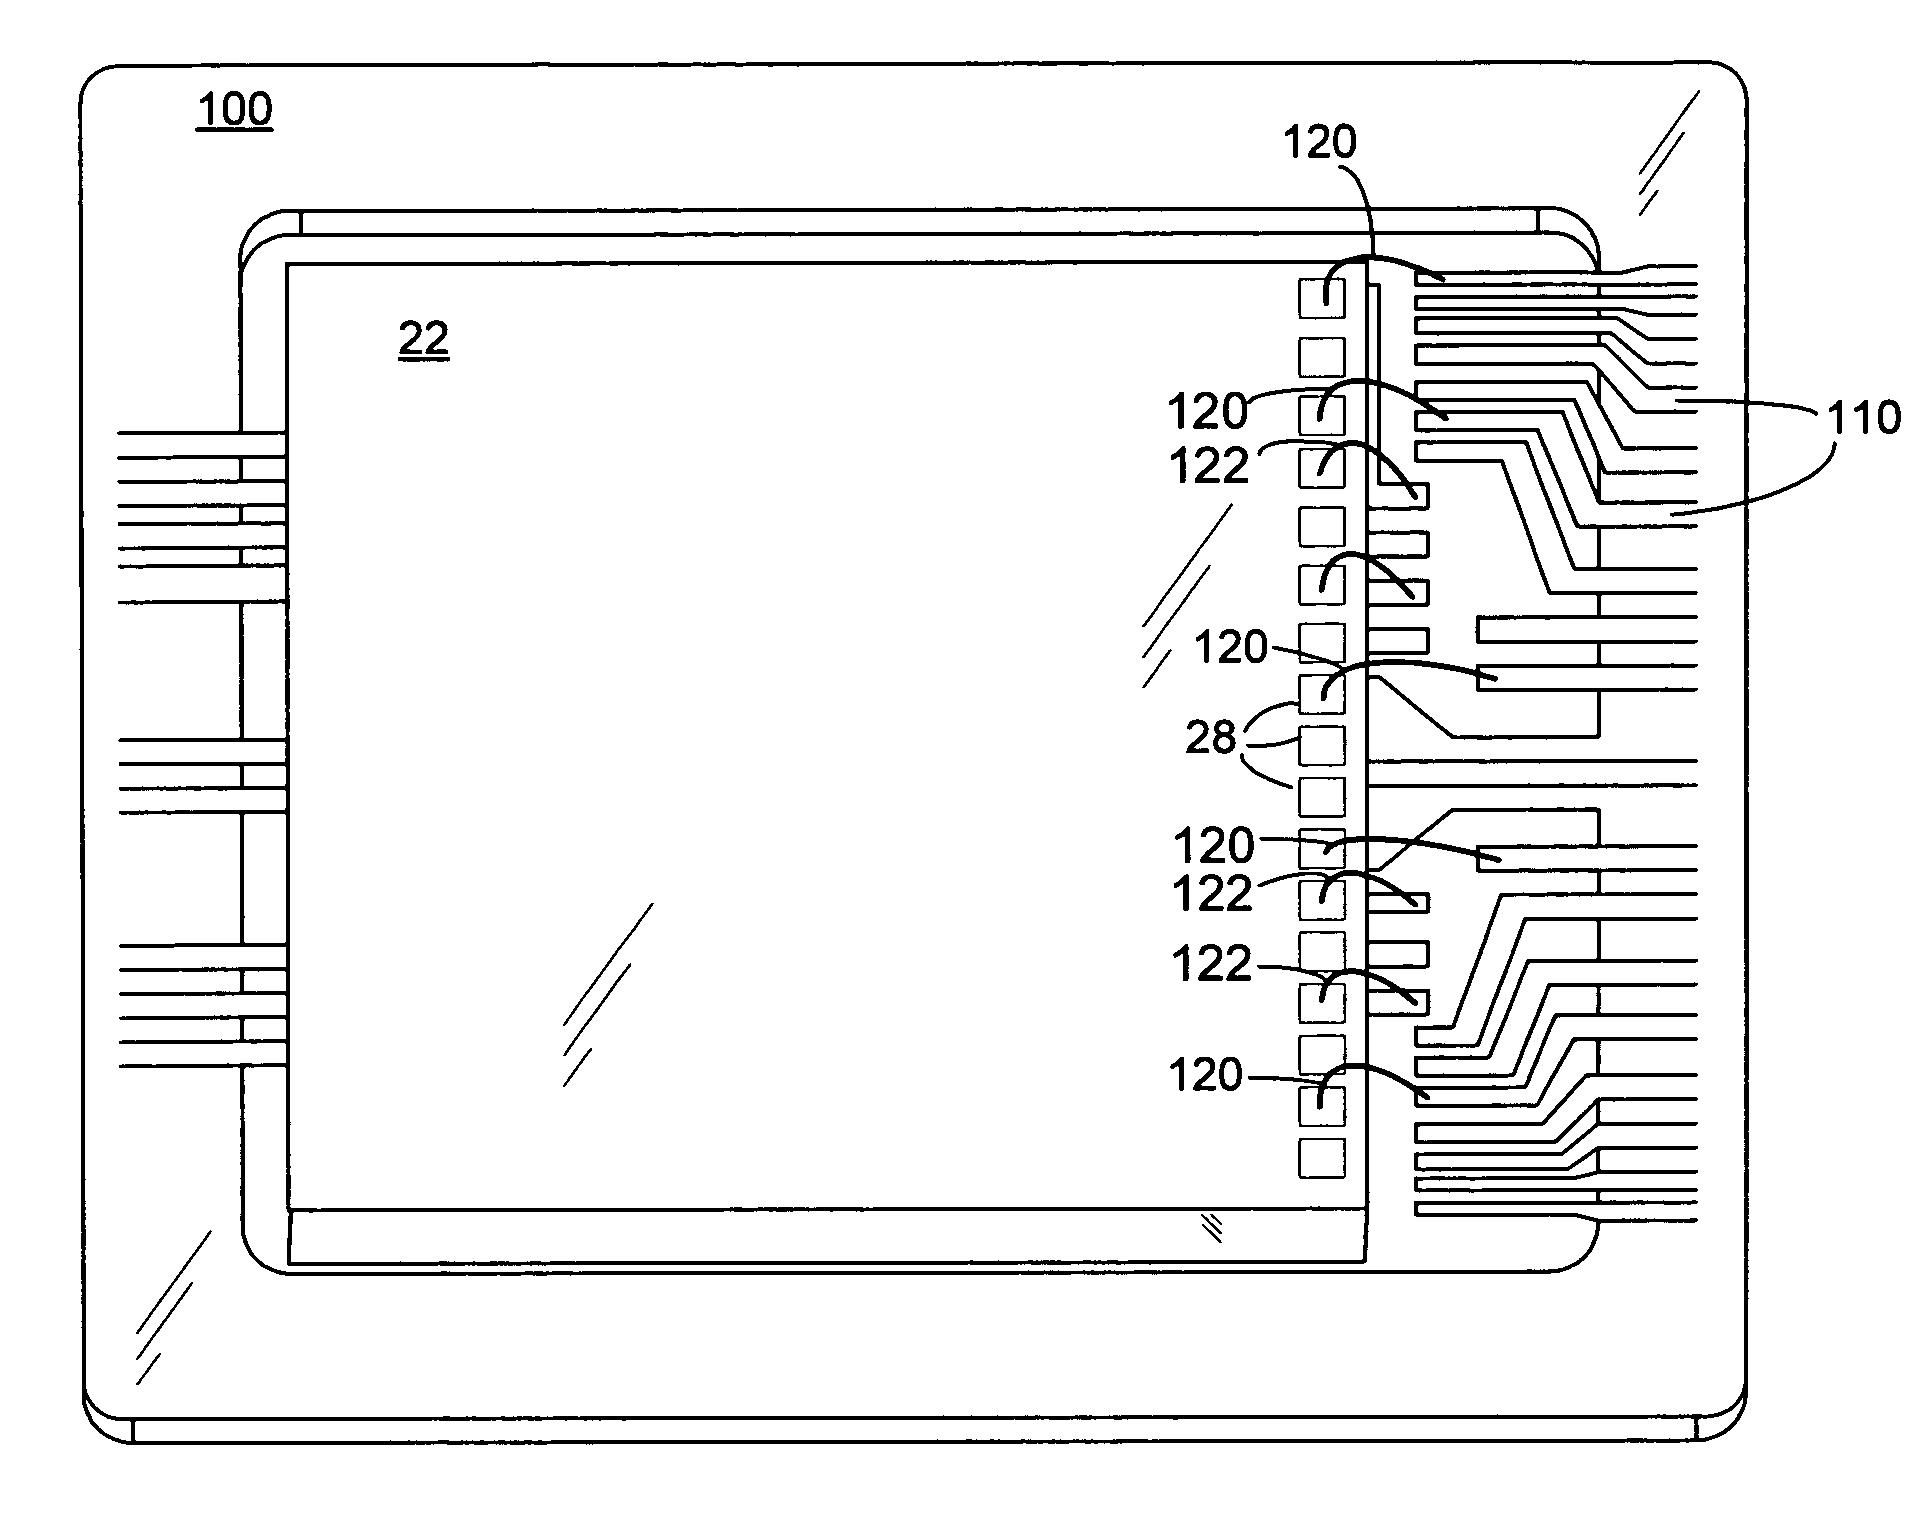 Die package with asymmetric leadframe connection